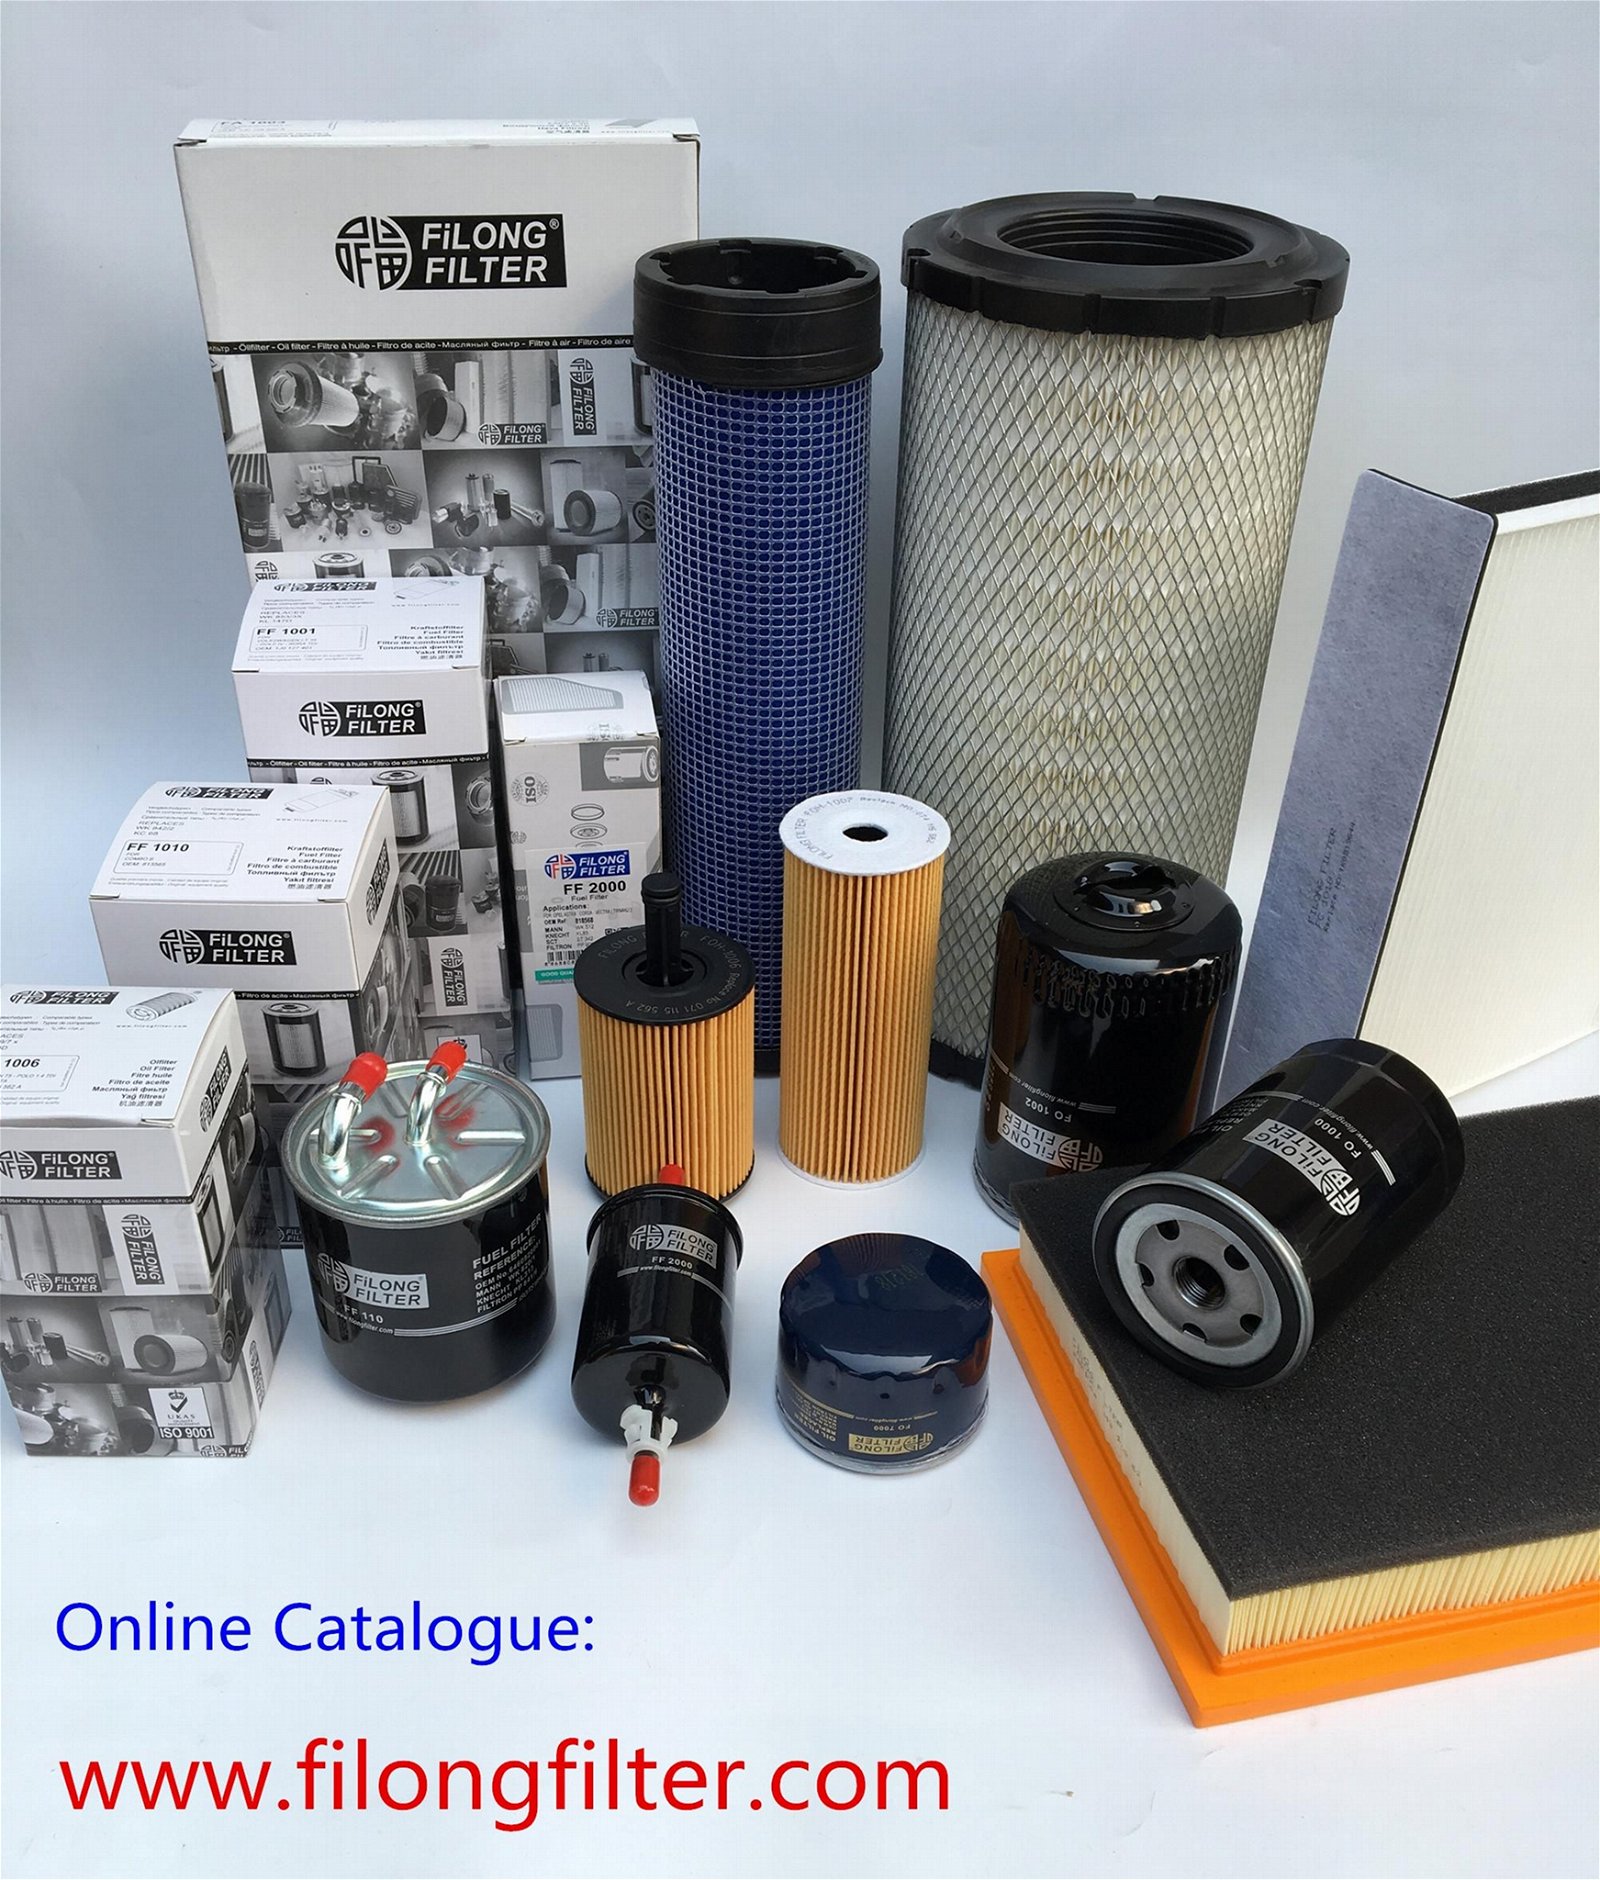 FILONG manufacturer Air Filter FA-8087 17801-36010 1780136010 FOR TOYOTA  AIR FILTER,FILONG Automotive filters Manufacturers in China, FILONG Automobile filters Manufacturers in China,FILONG Automotive filters  Suppliers In China,FILONG Automobile filters  Suppliers In China,